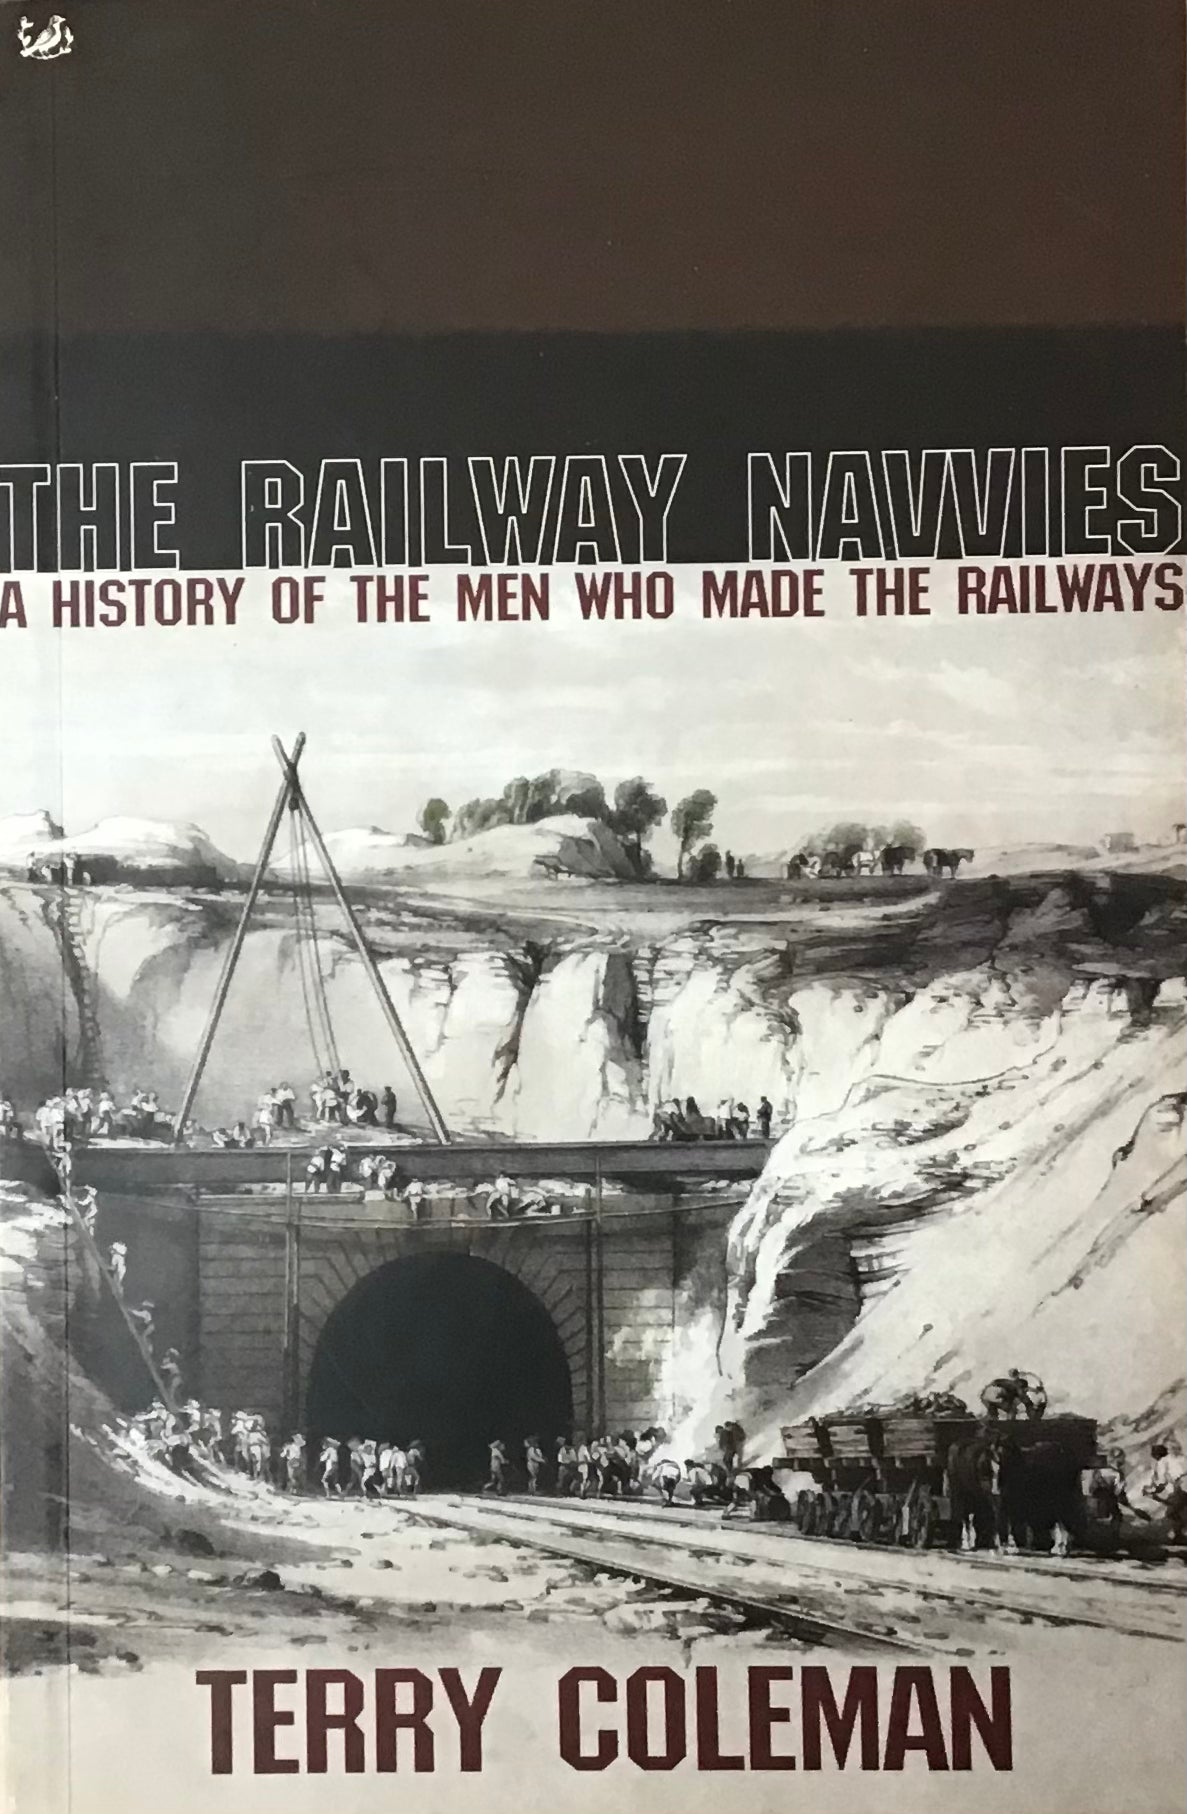 The Railway Navvies: A History of the Men Who Made the Railways by Terry Coleman - Chester Model Centre